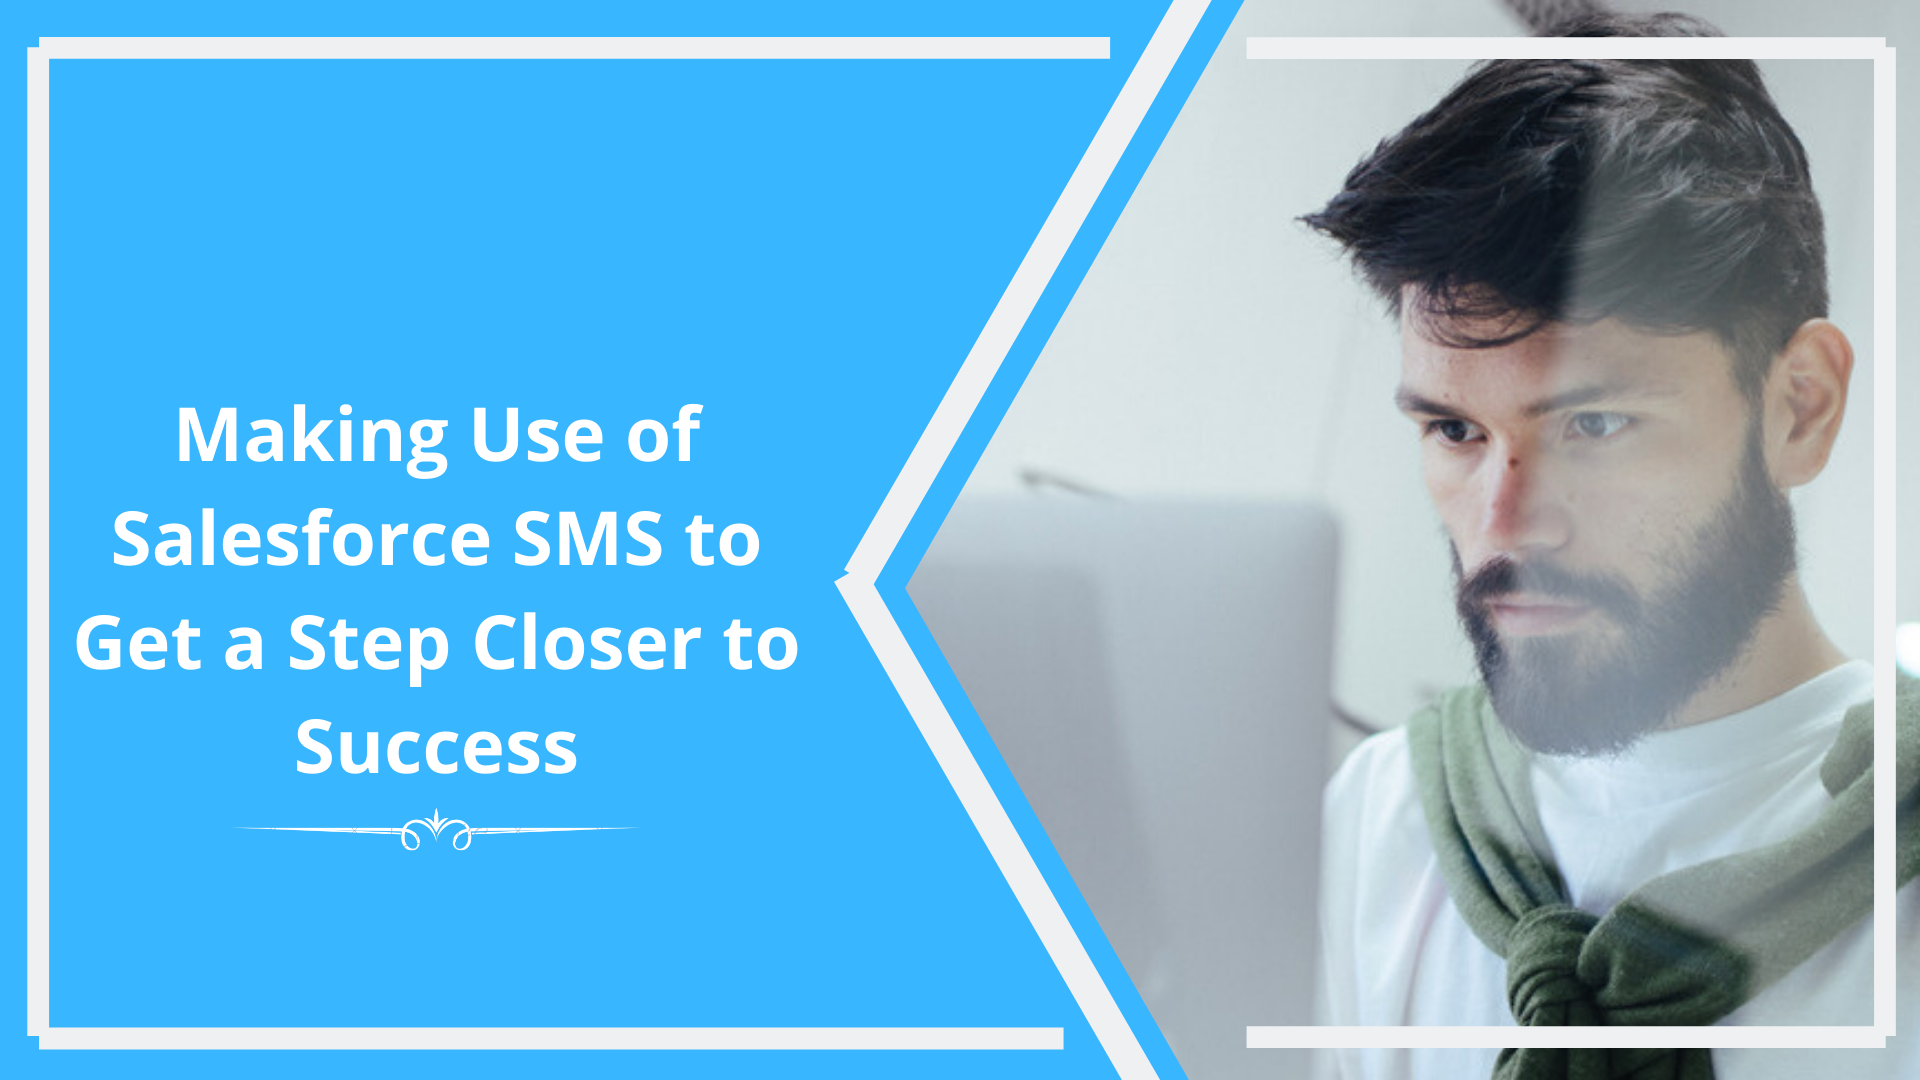 Making Use of Salesforce SMS to Get a Step Closer to Success